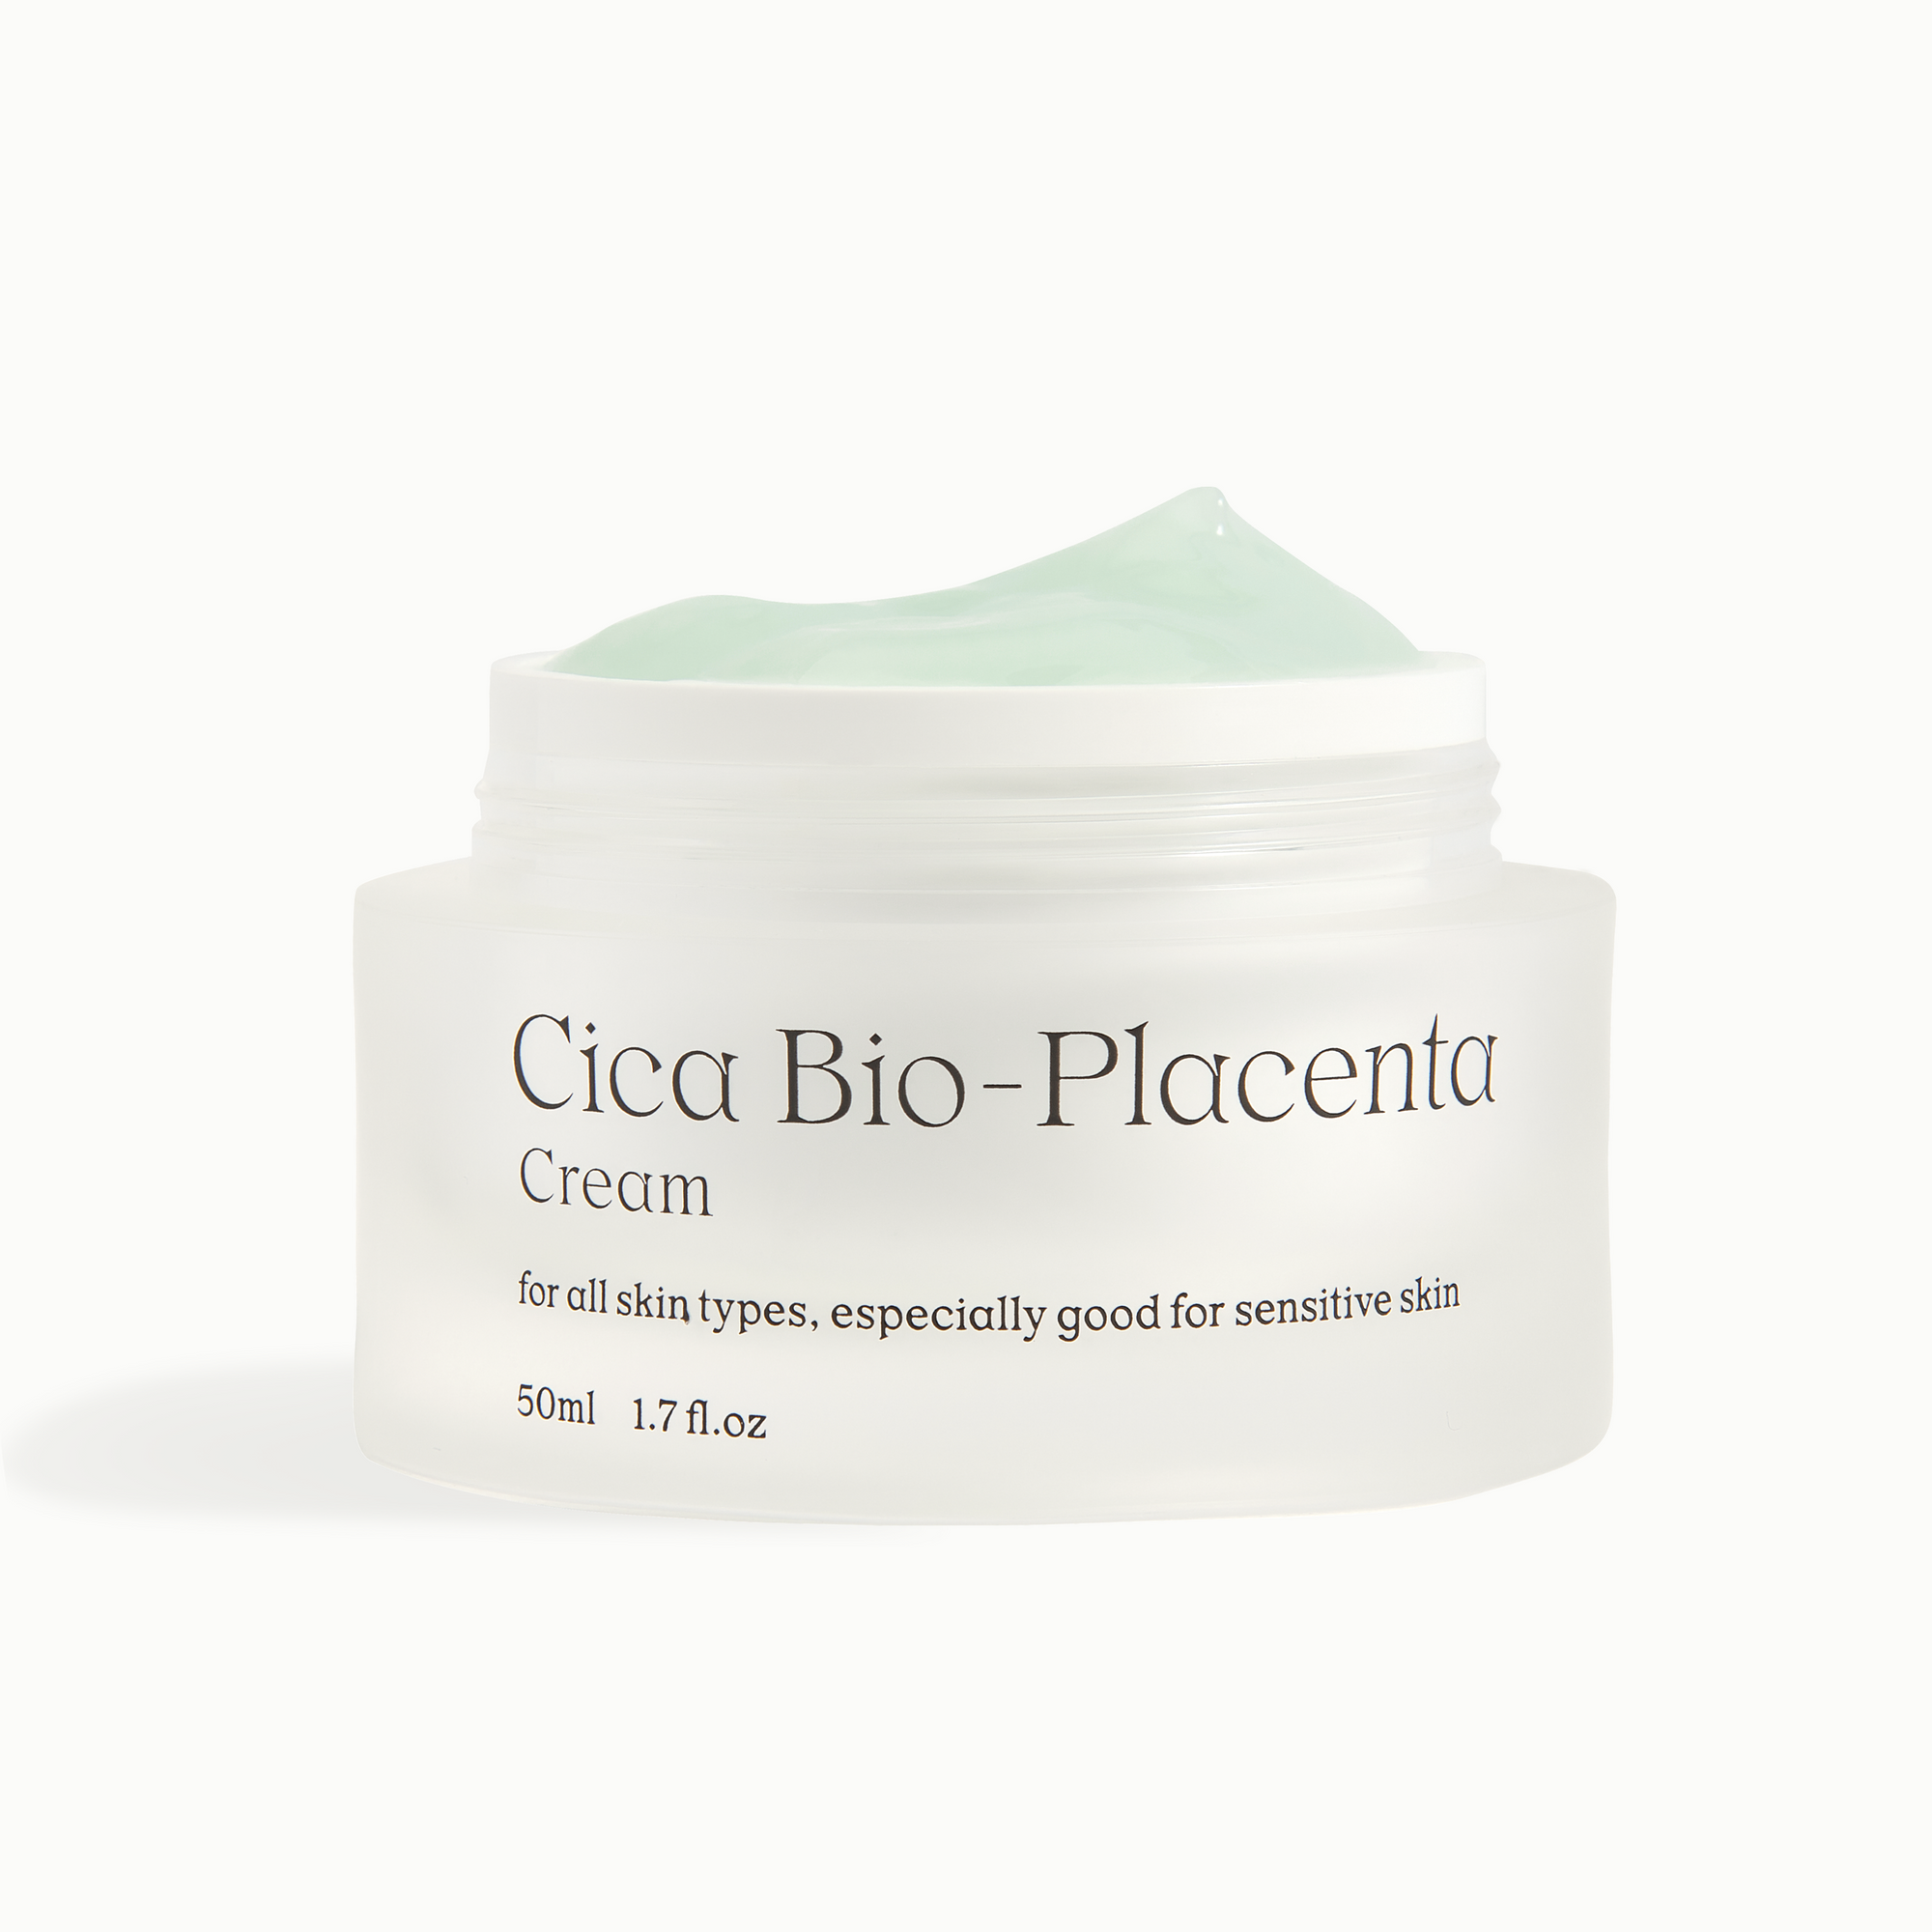 K-beauty Natural derma Project cica bio-placenta cream for all skin types, especially good for sensitive skin.